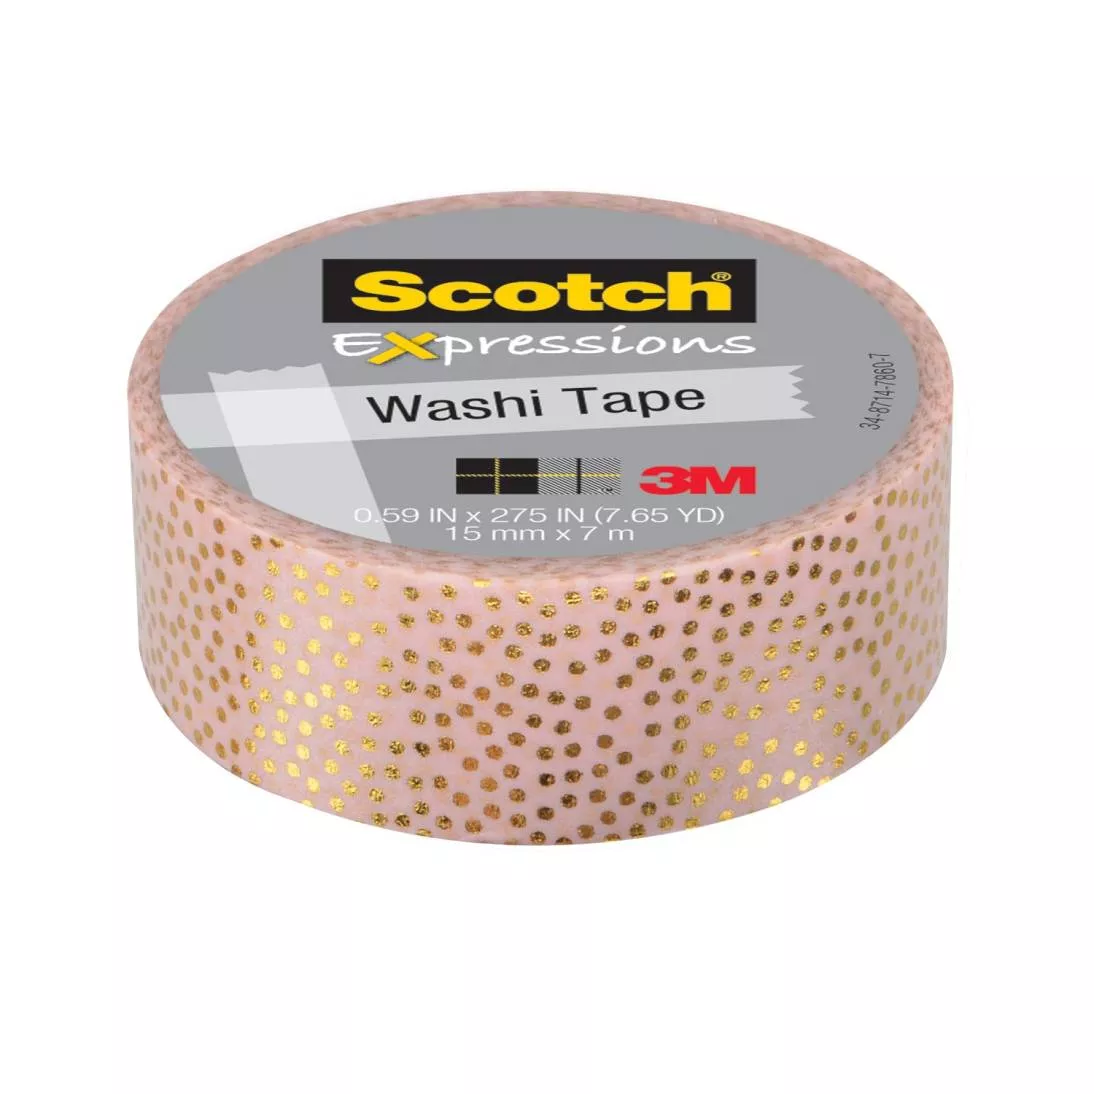 Scotch® Expressions Washi Tape C614-P2, Pastel Pink with Gold Foil Dots